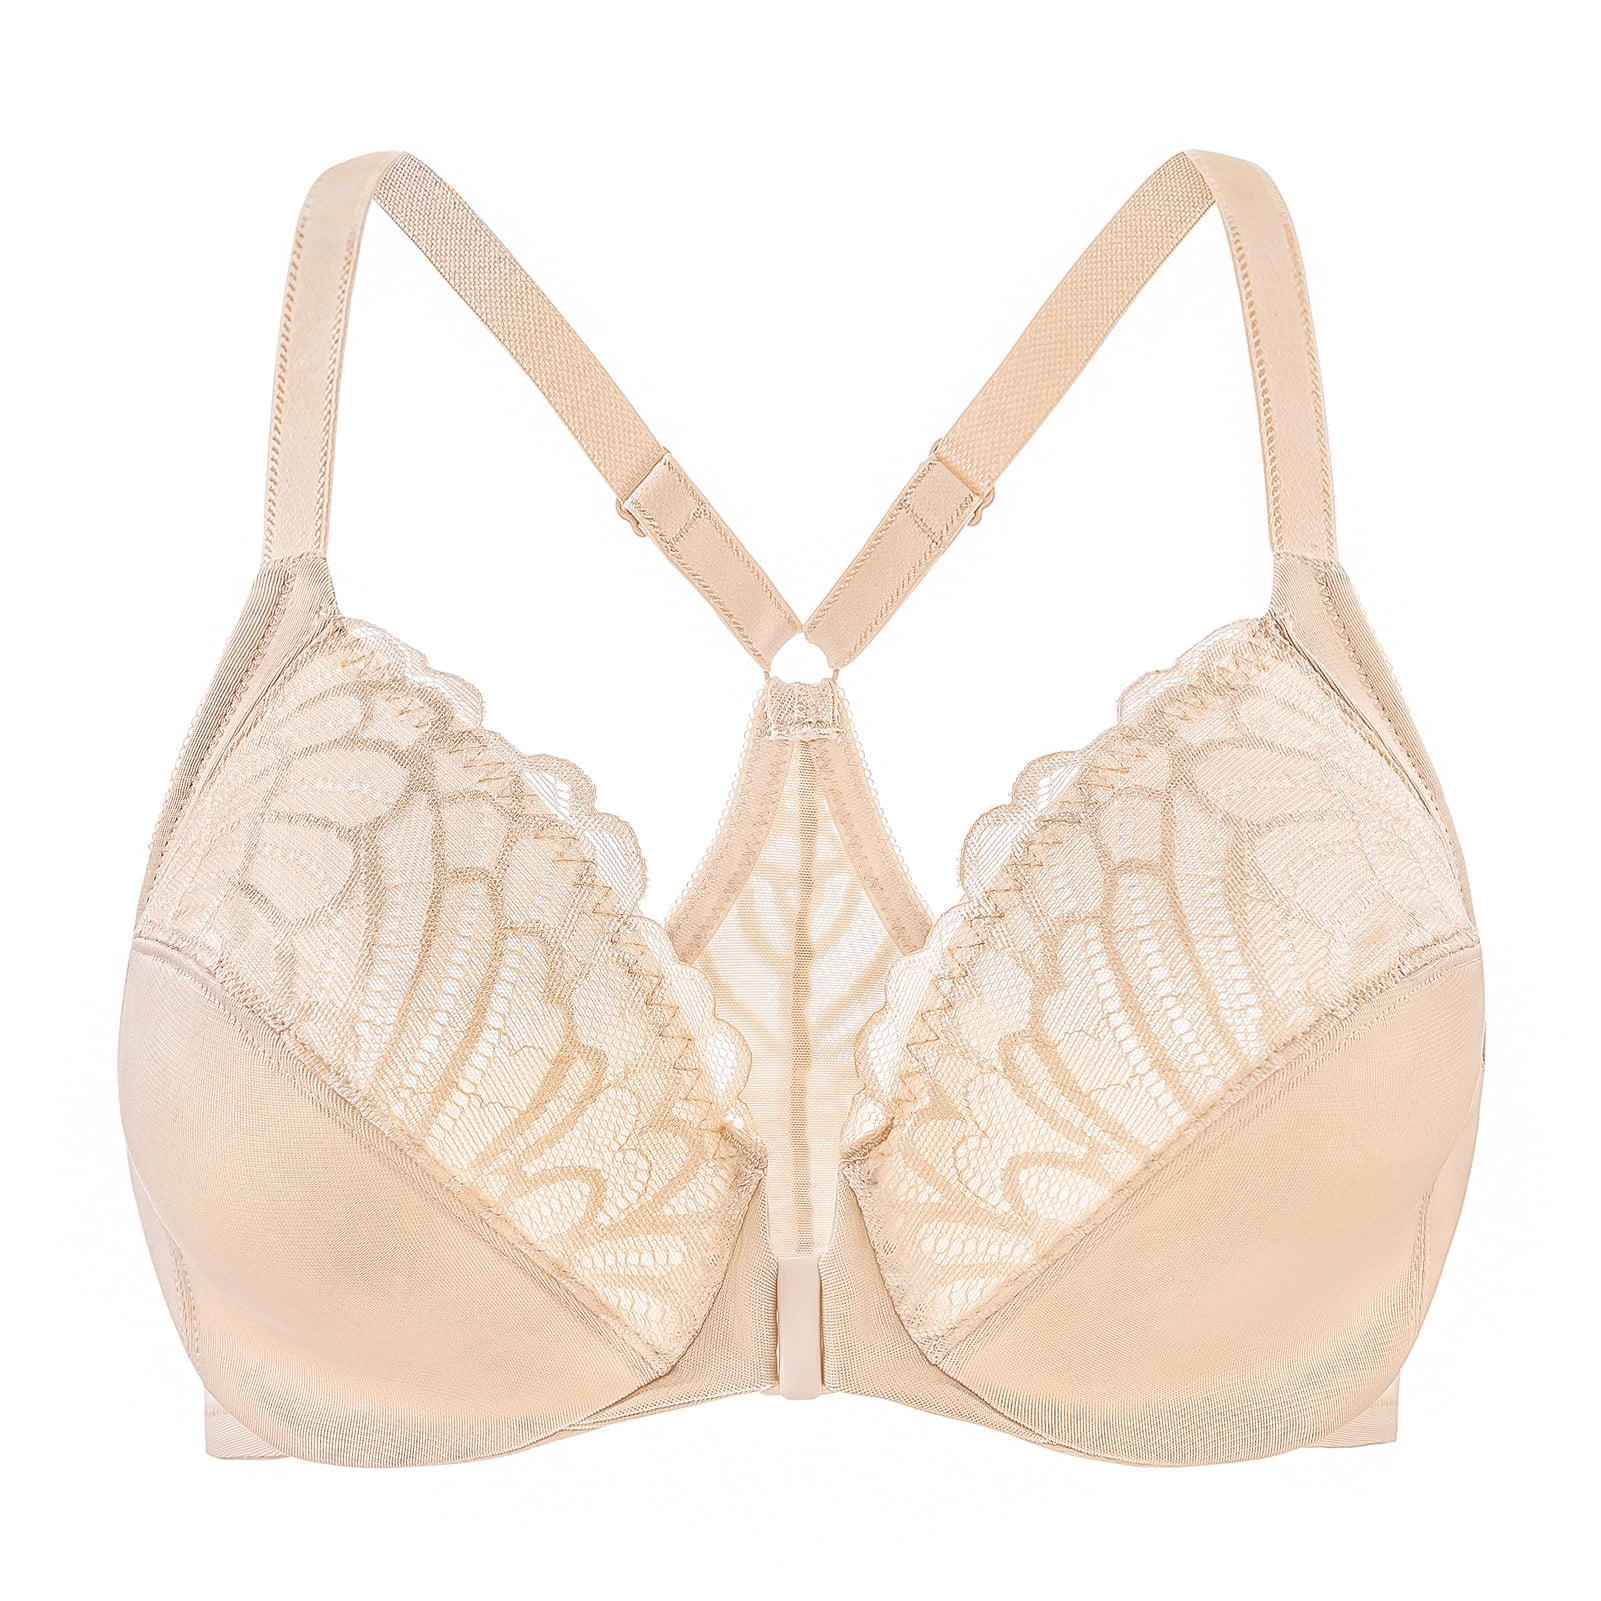 MELENECA Underwire Front Closure Bras for Women Pale Nude 44D